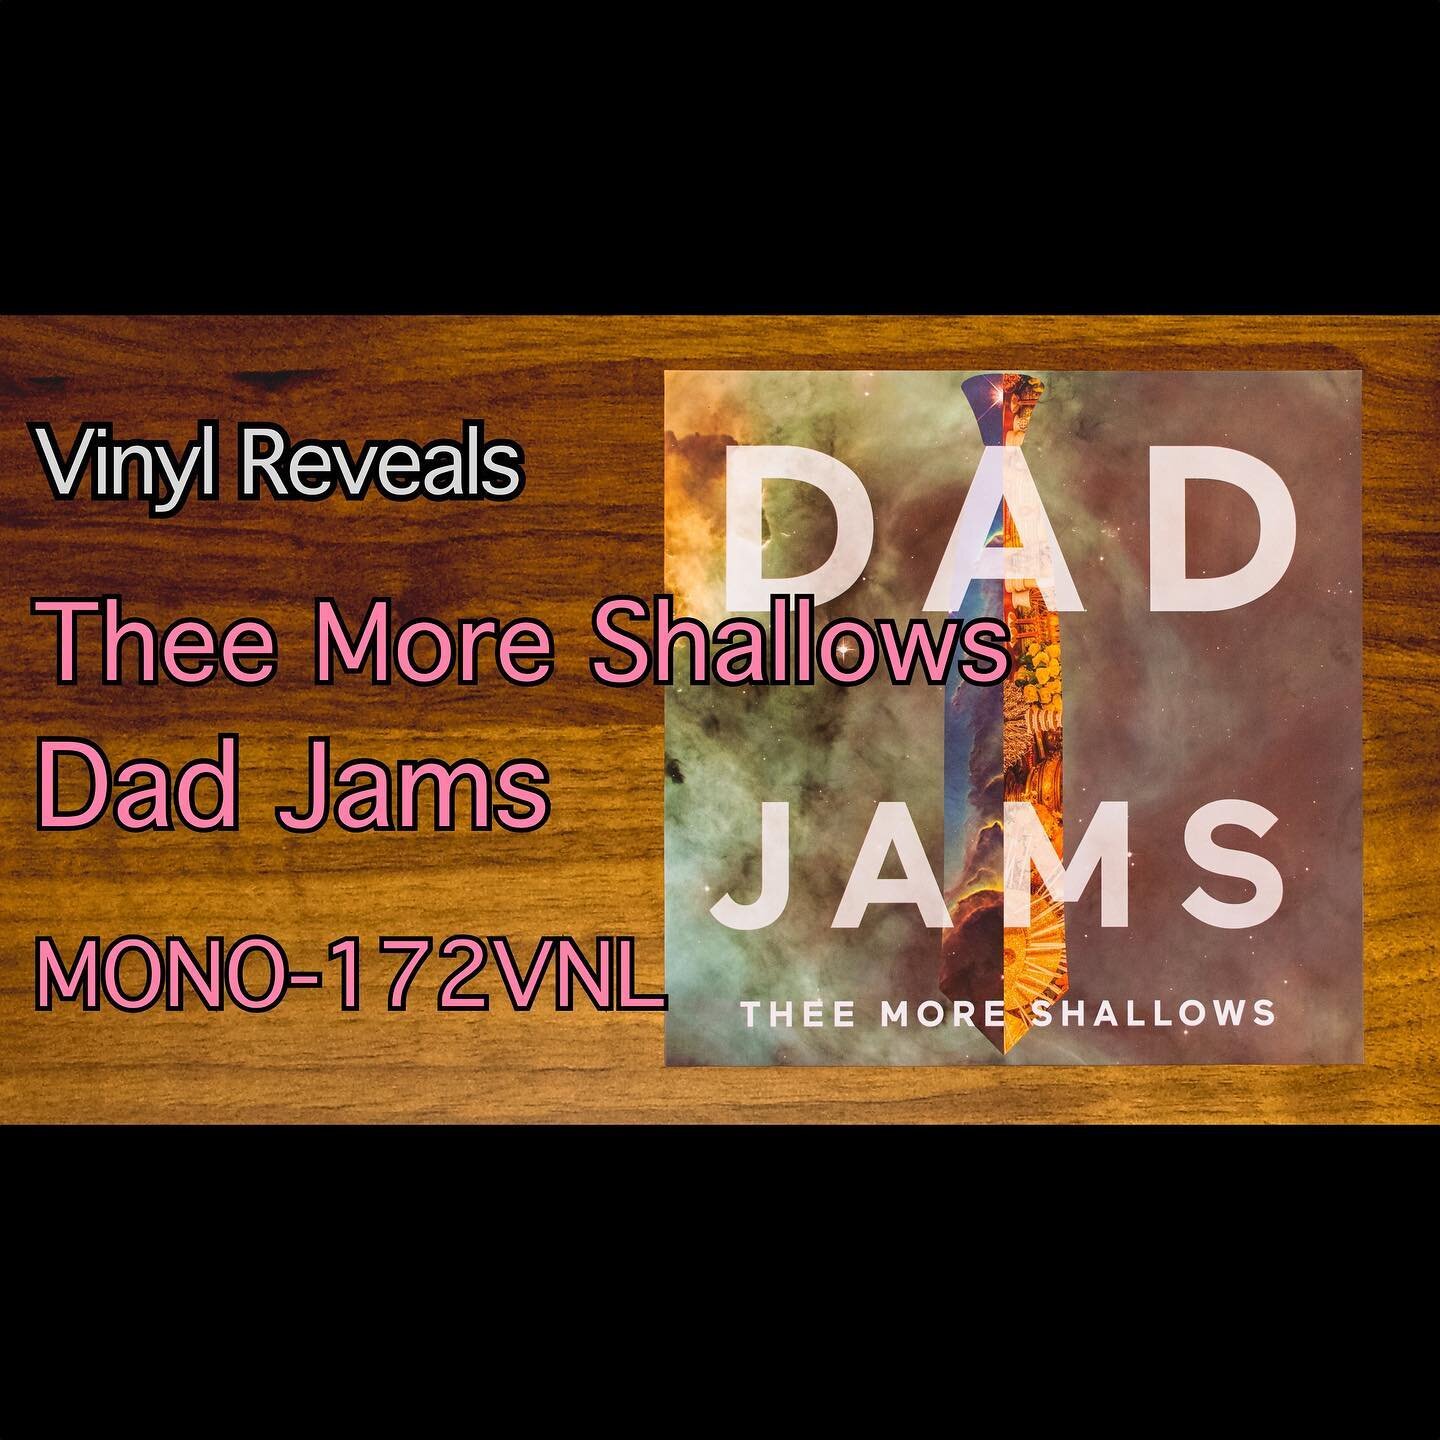 Today we are looking at Dad Jams by Thee More Shallows. Video is now live on the Vinyl Reveals YouTube channel. Link in profile.

#vinylReveal #vinyl #vinylcollection #vinylrecords #records #vinylReveals #vinylcommunity @thetheemoreshallows  #theemor